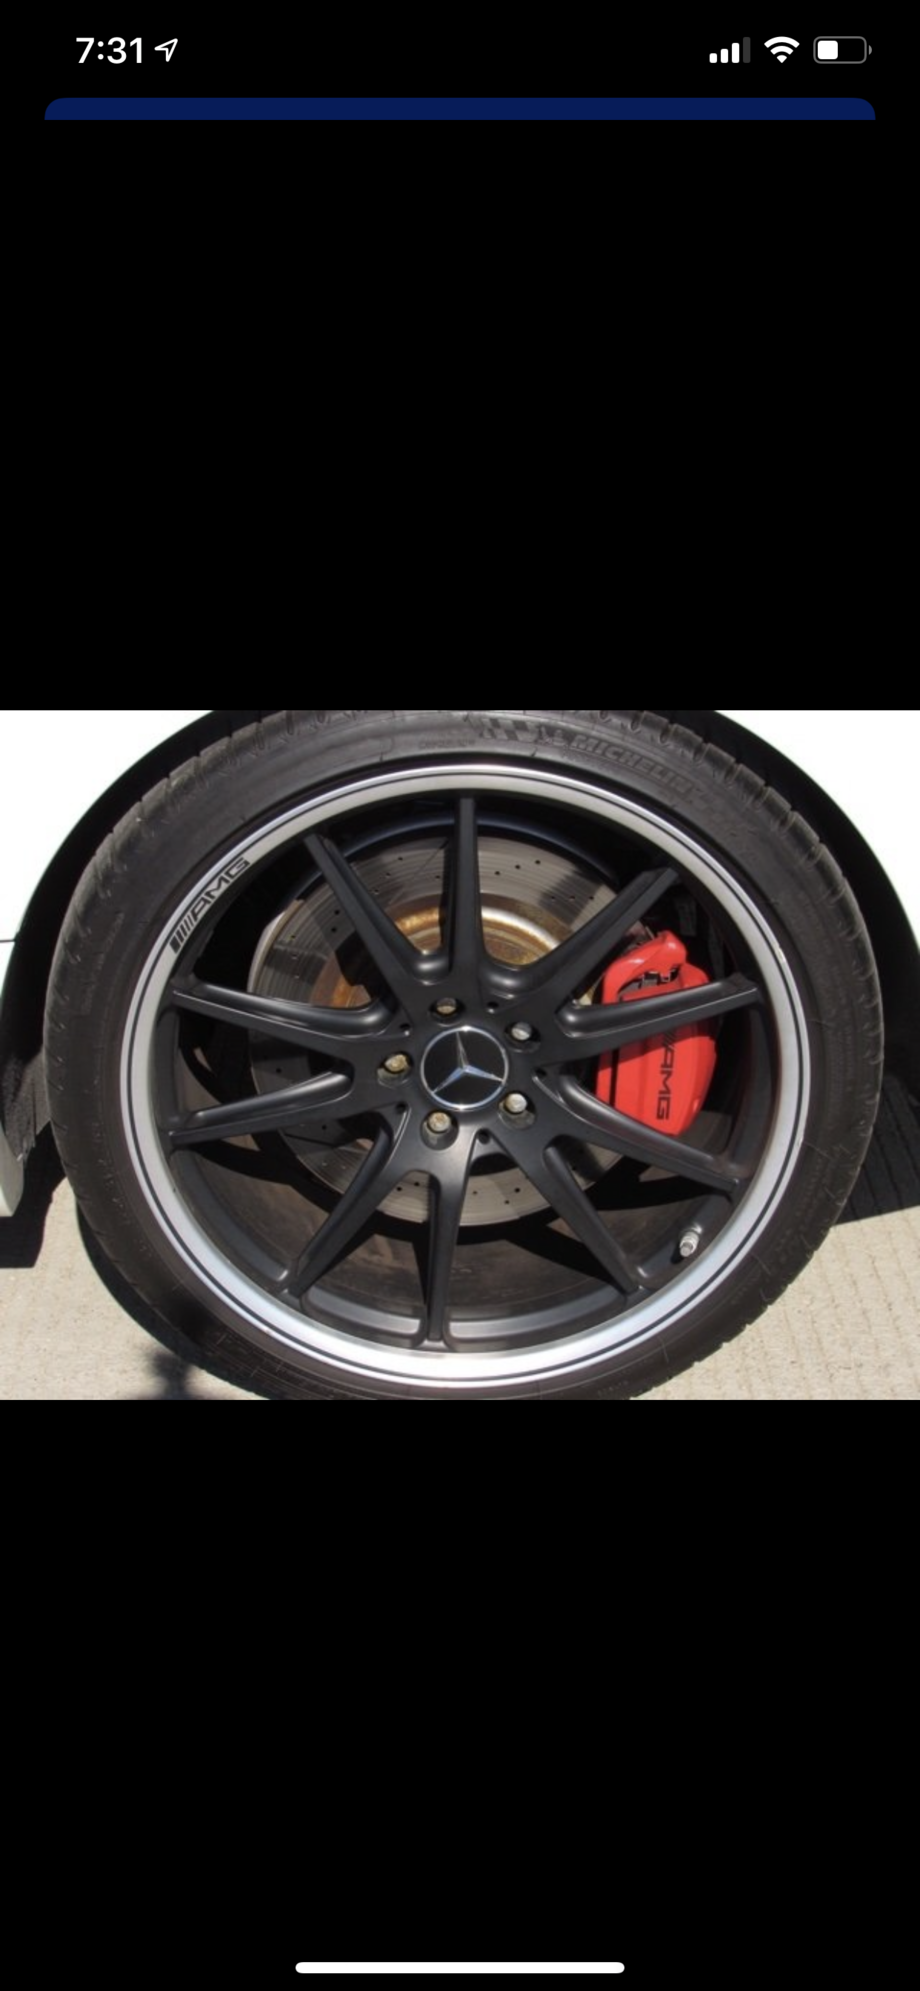 Wheels and Tires/Axles - ISO: C63 Wheels - Used - 2016 to 2020 Mercedes-Benz C63 AMG S - Austin, TX 78704, United States